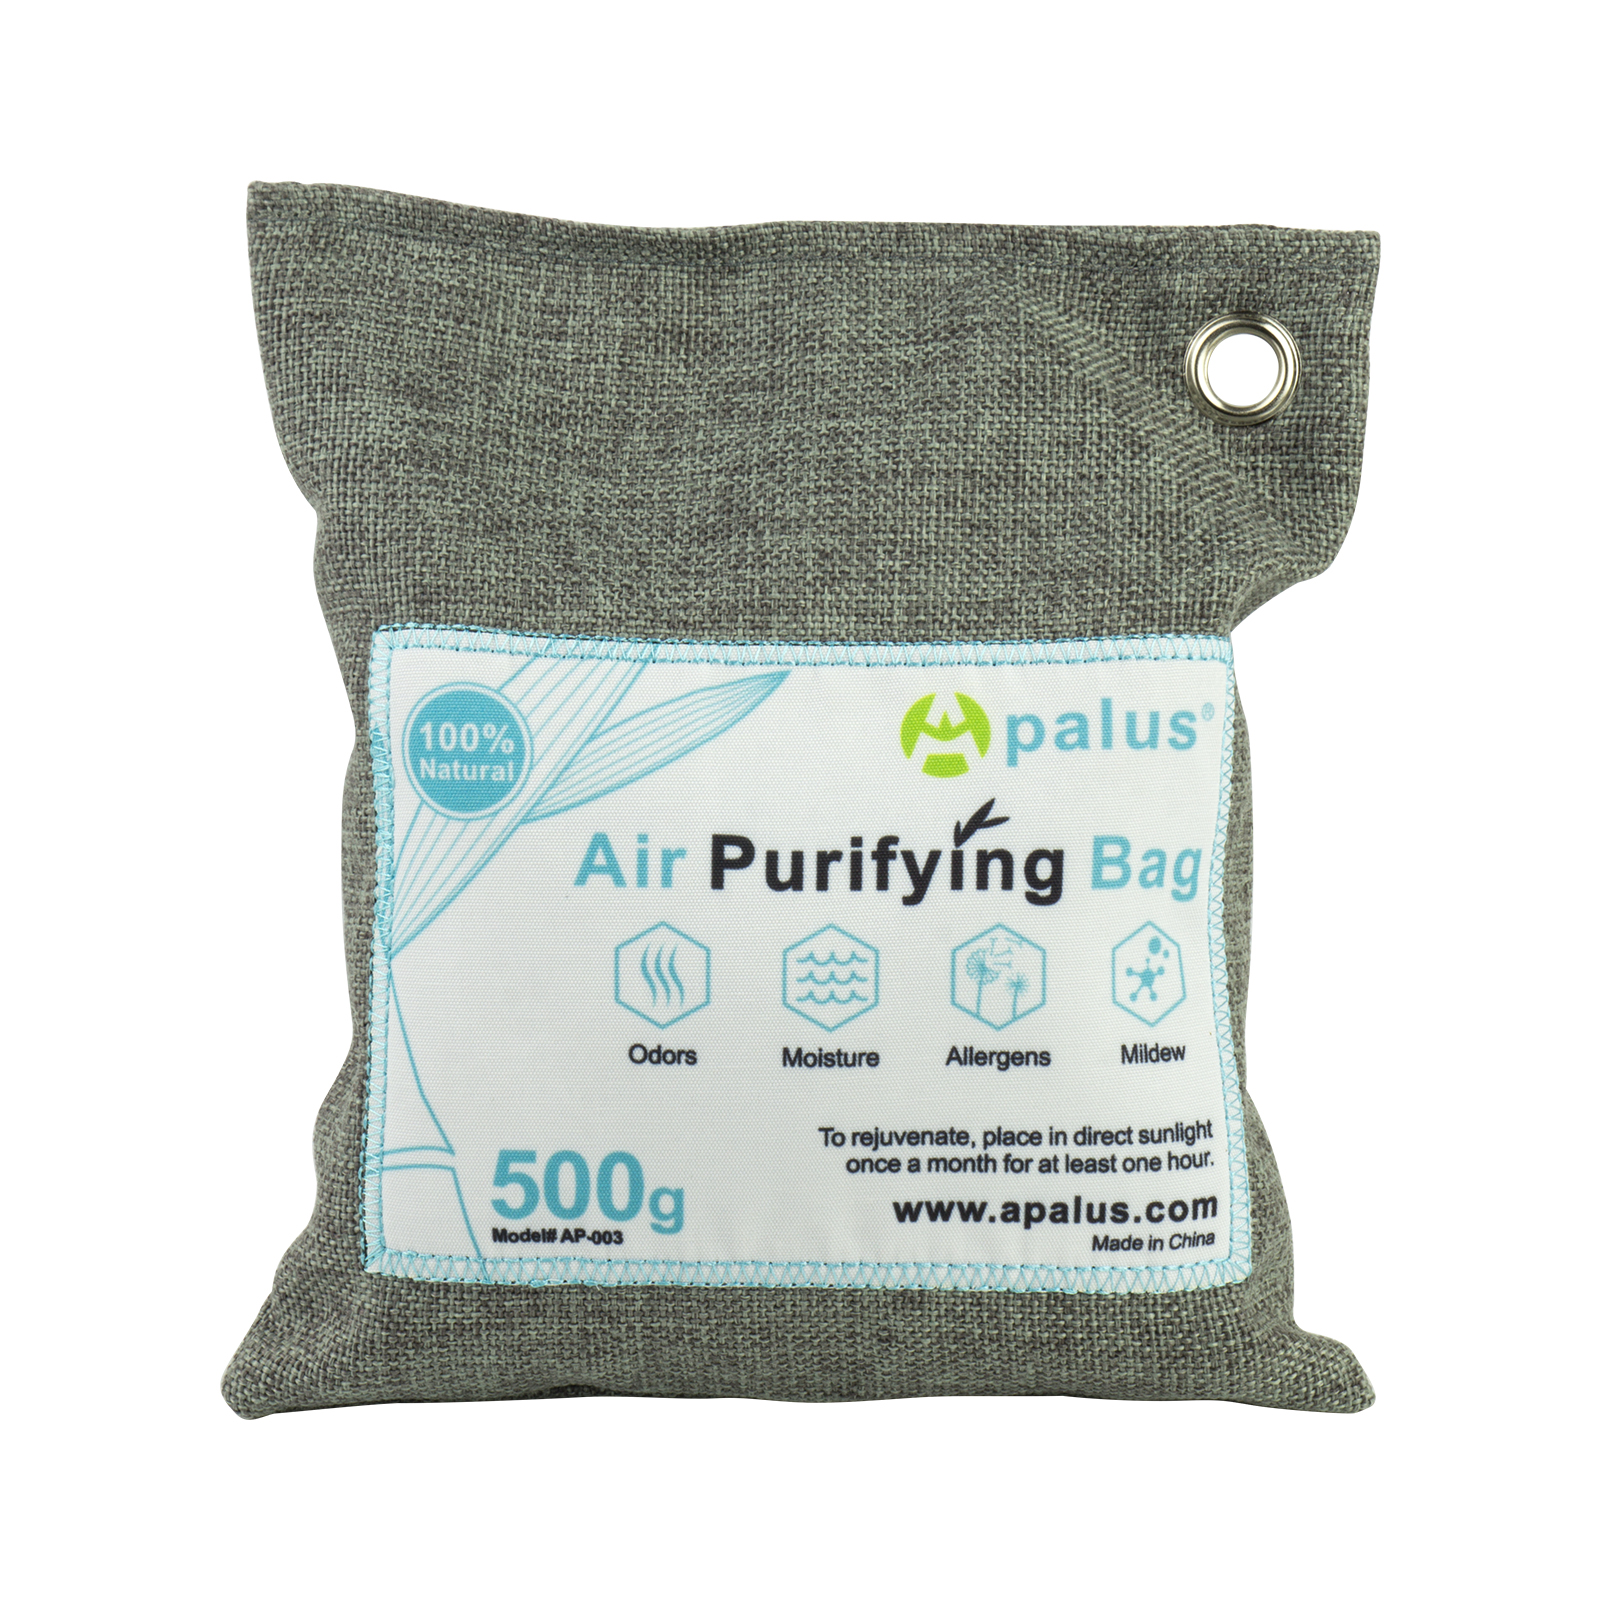 Apalus Air Purifying Bag, Bamboo Activated Charcoal Air Freshener, Car Air Dehumidifier, Deodorizer and Purifier Bags-100% Natural & Chemical Free Moisture, Odor Absorber, 500G